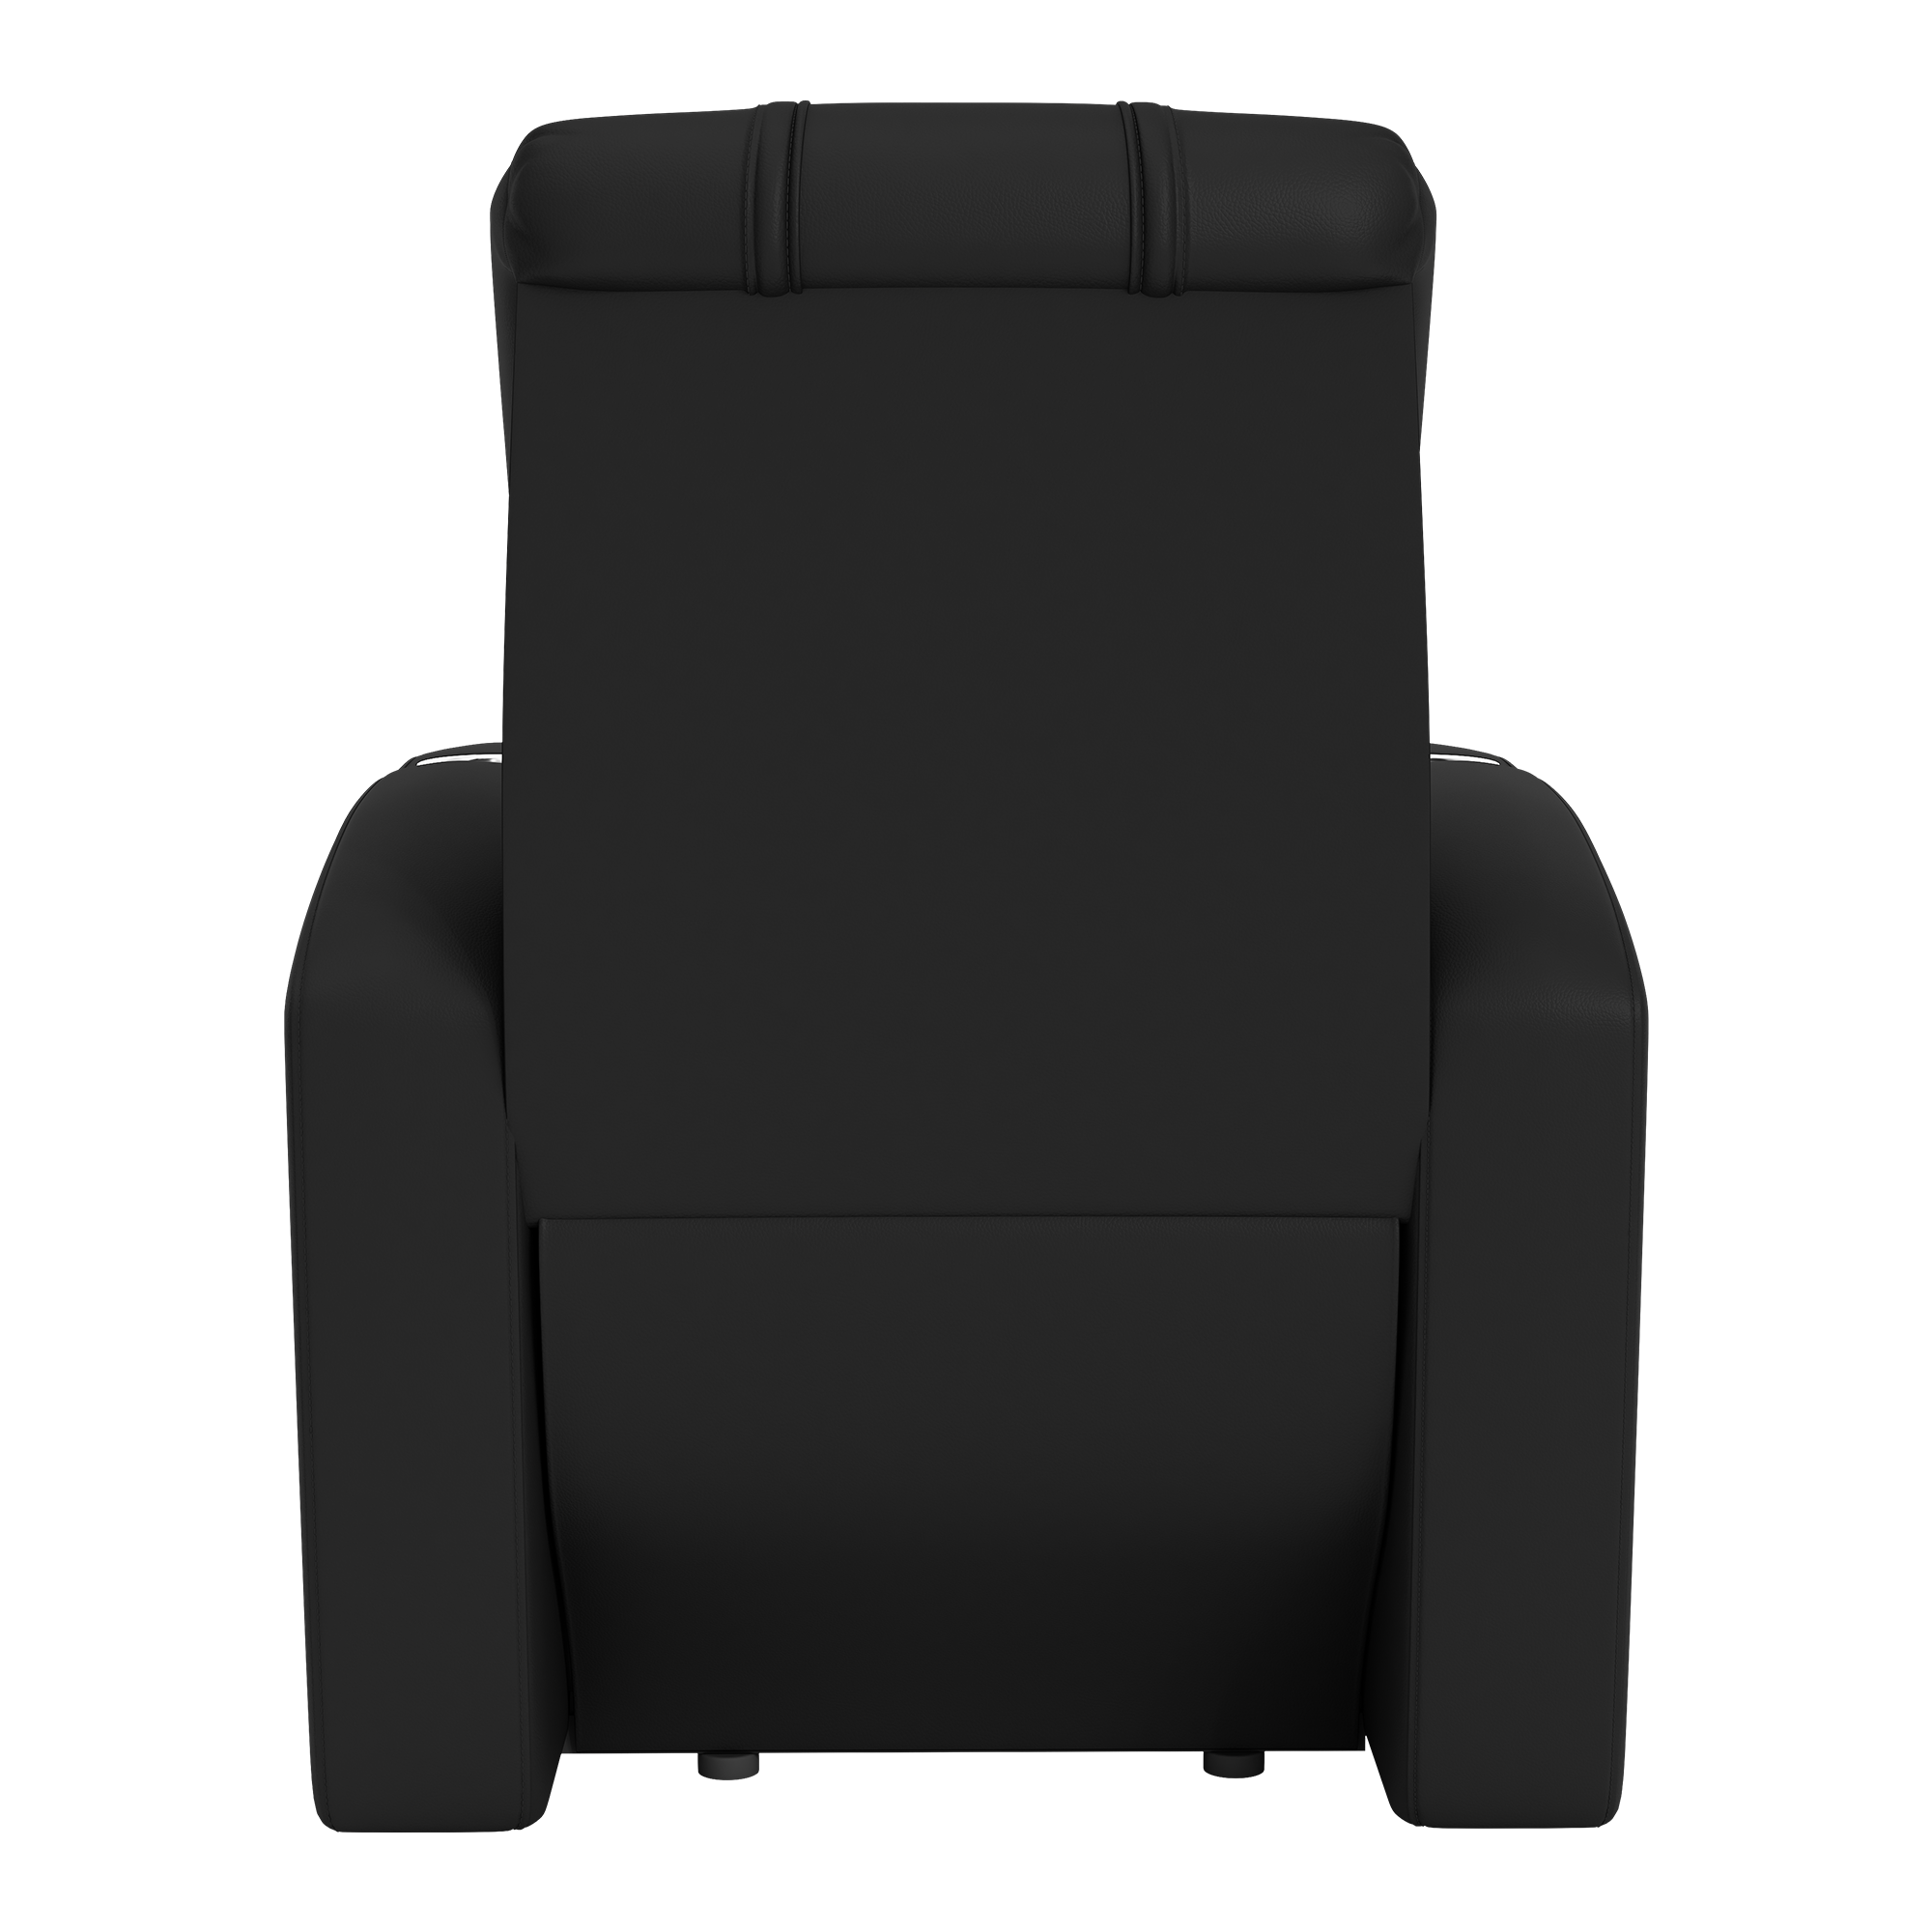 Stealth Recliner with New York Mets Cooperstown Secondary